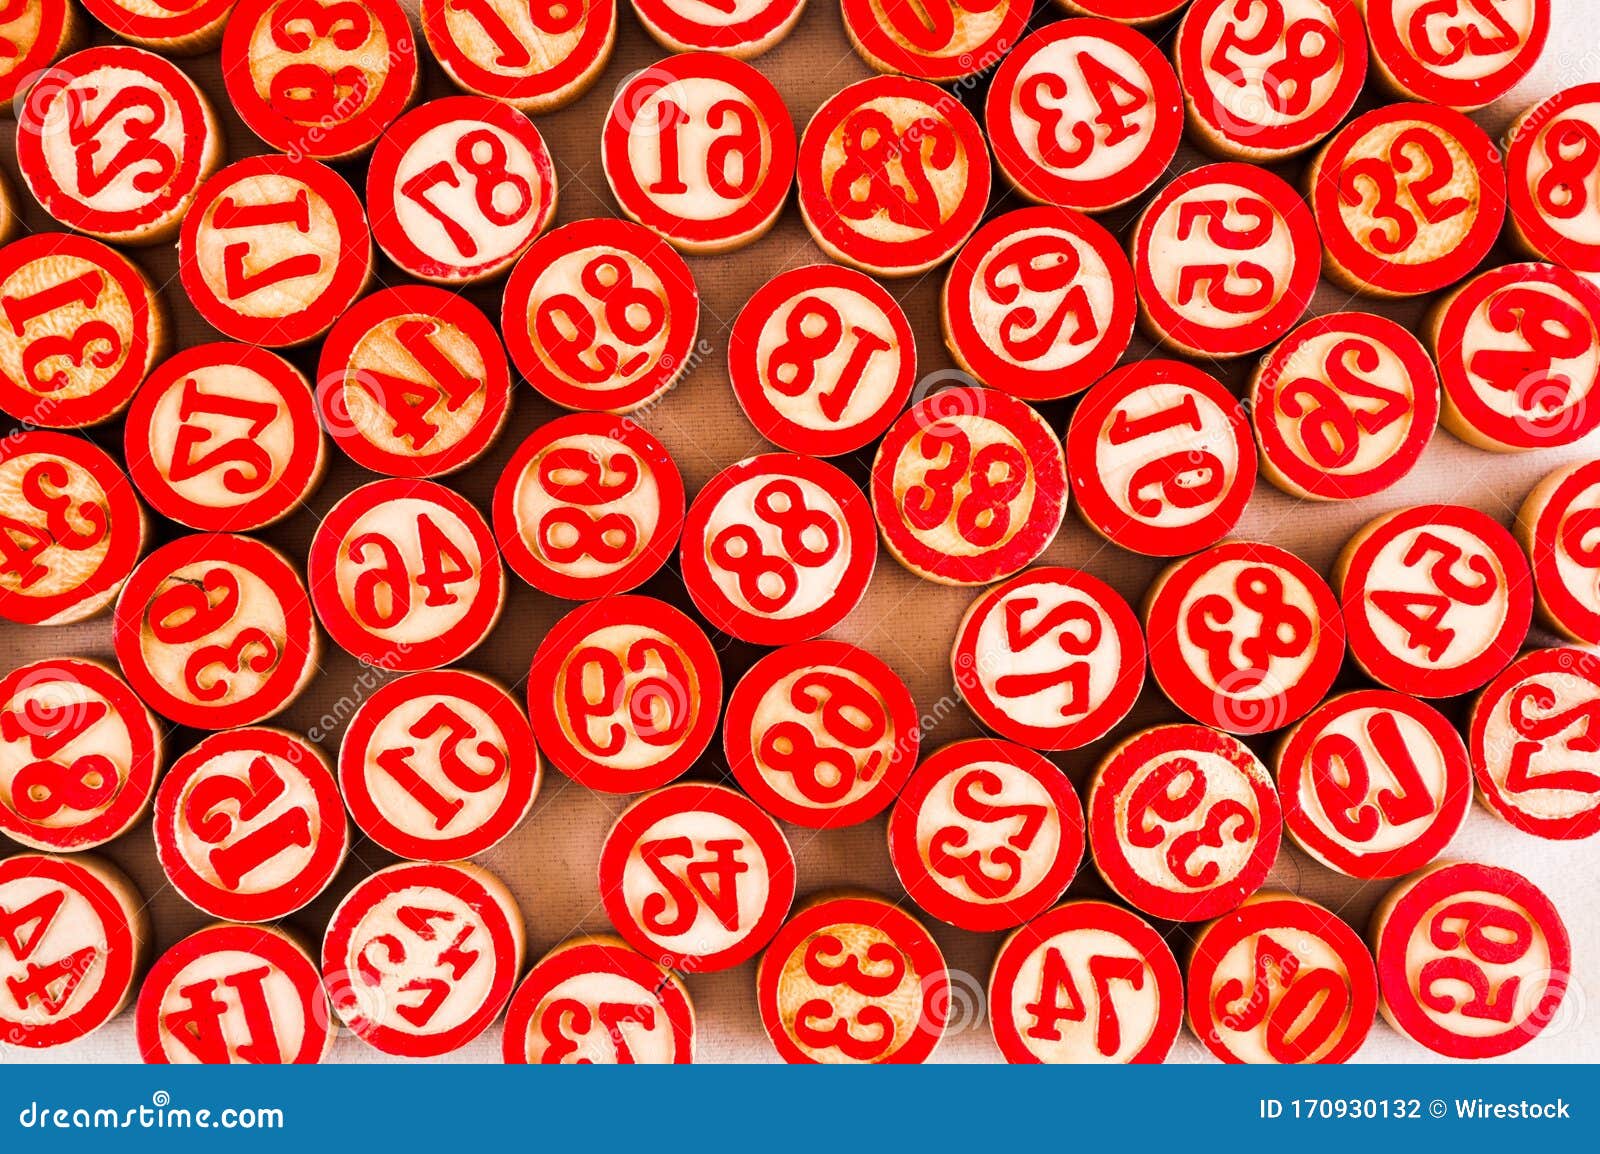 Lucky Numbers In Various Colours RoyaltyFree Stock Image